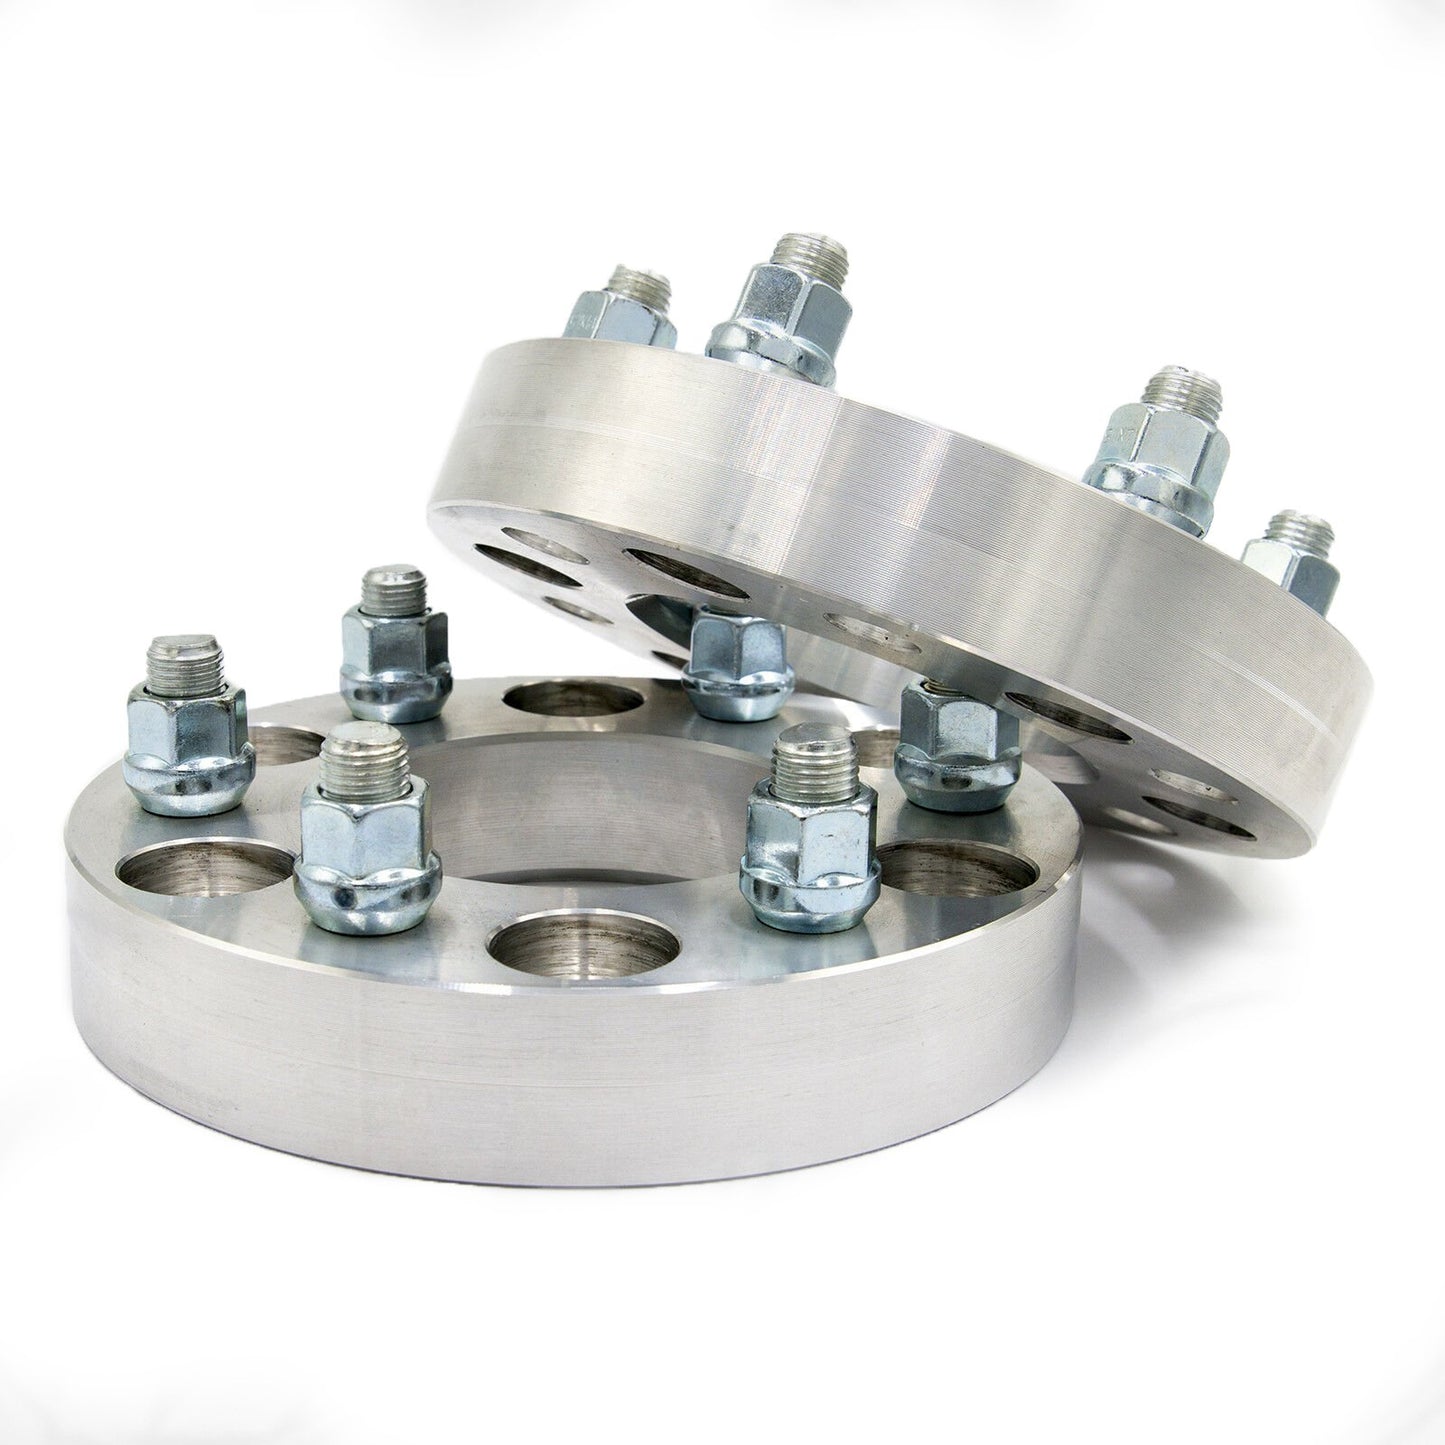 6x132 Wheel Spacers For Chevy, GMC, Saturn, Buick w/ 14x1.5 Studs & Lug Nuts 74.5mm Center Bore - Thickness: 3/4" - 4" in